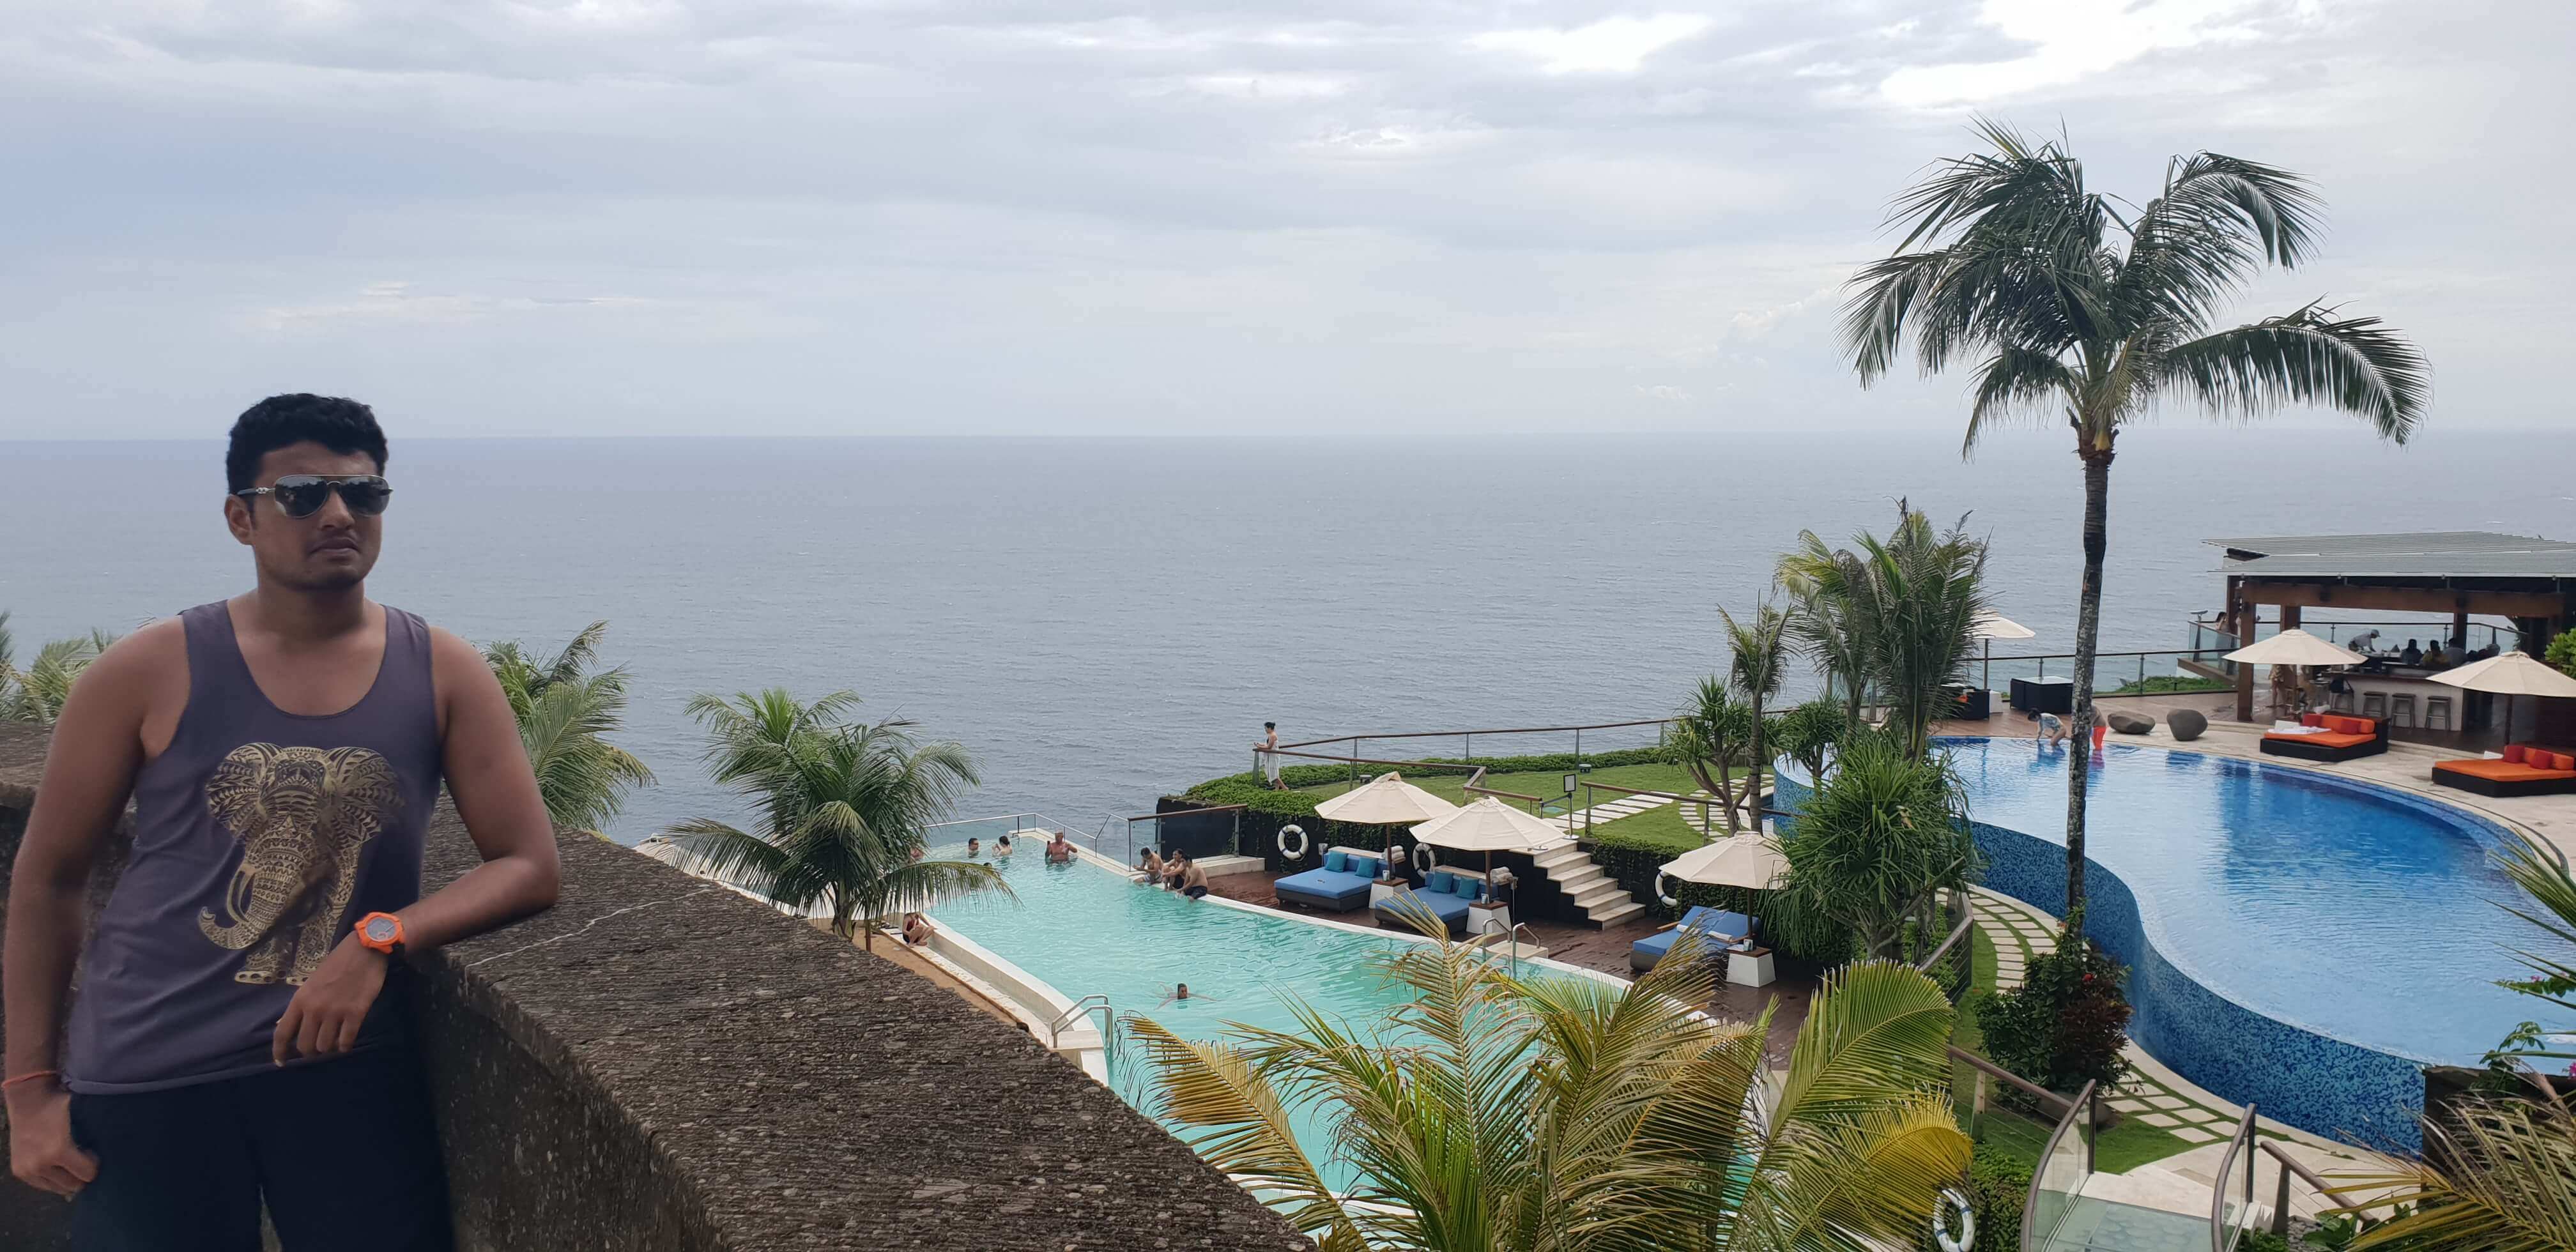 Oneeighty° clifftop club offers you the most sophisticated beach club experience in Bali